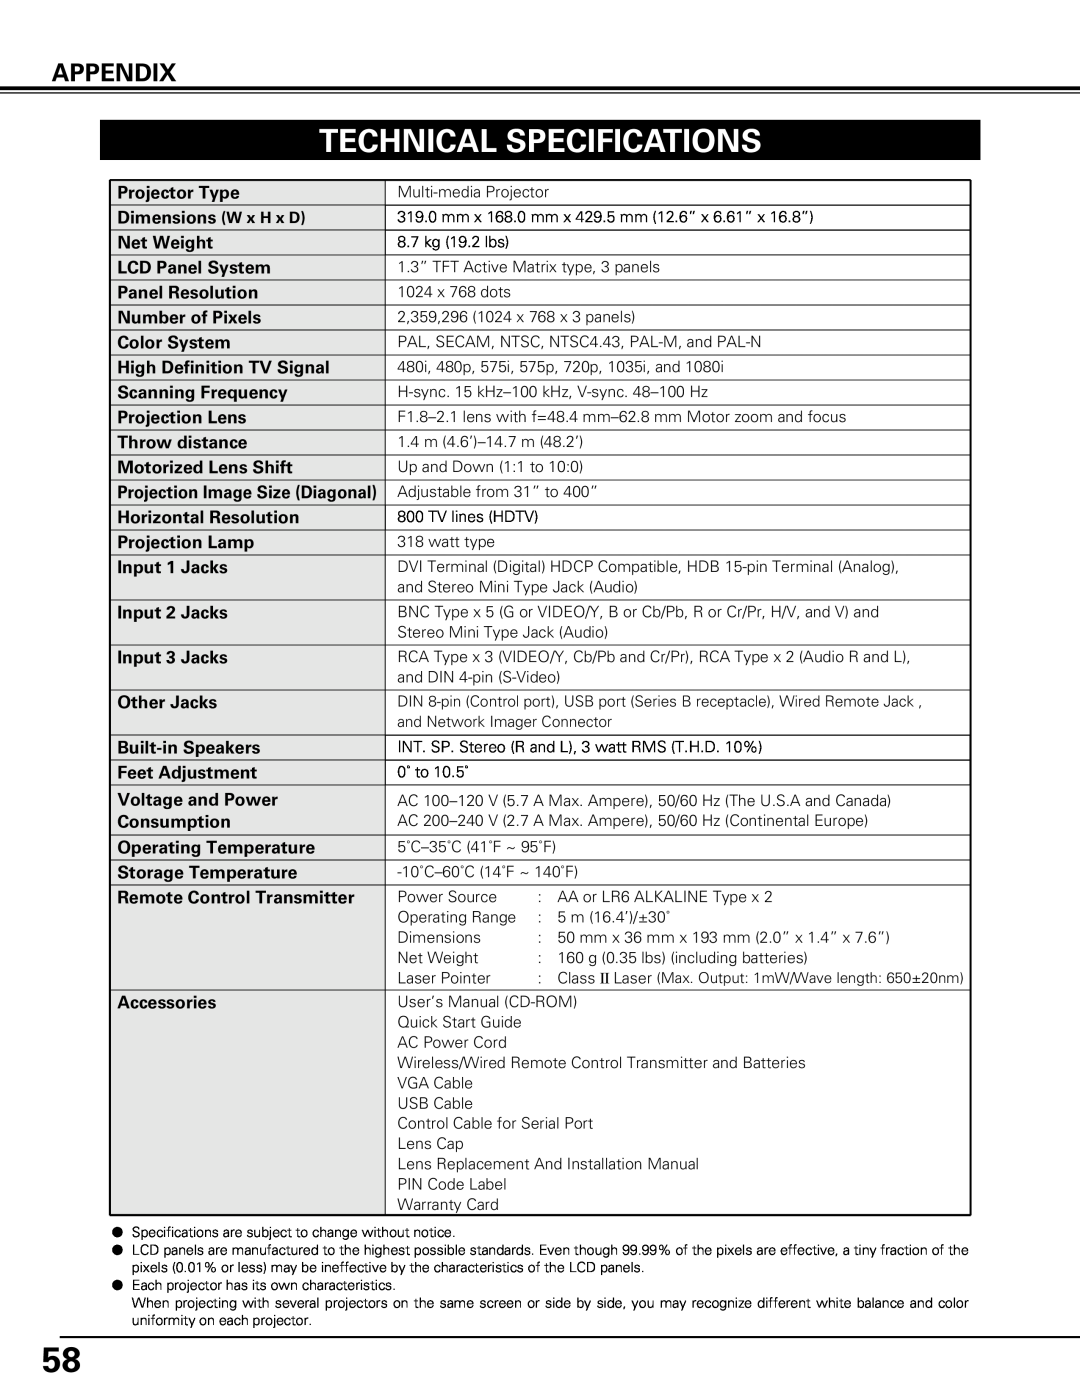 Canon LV-7575 user manual Technical Specifications, Appendix 